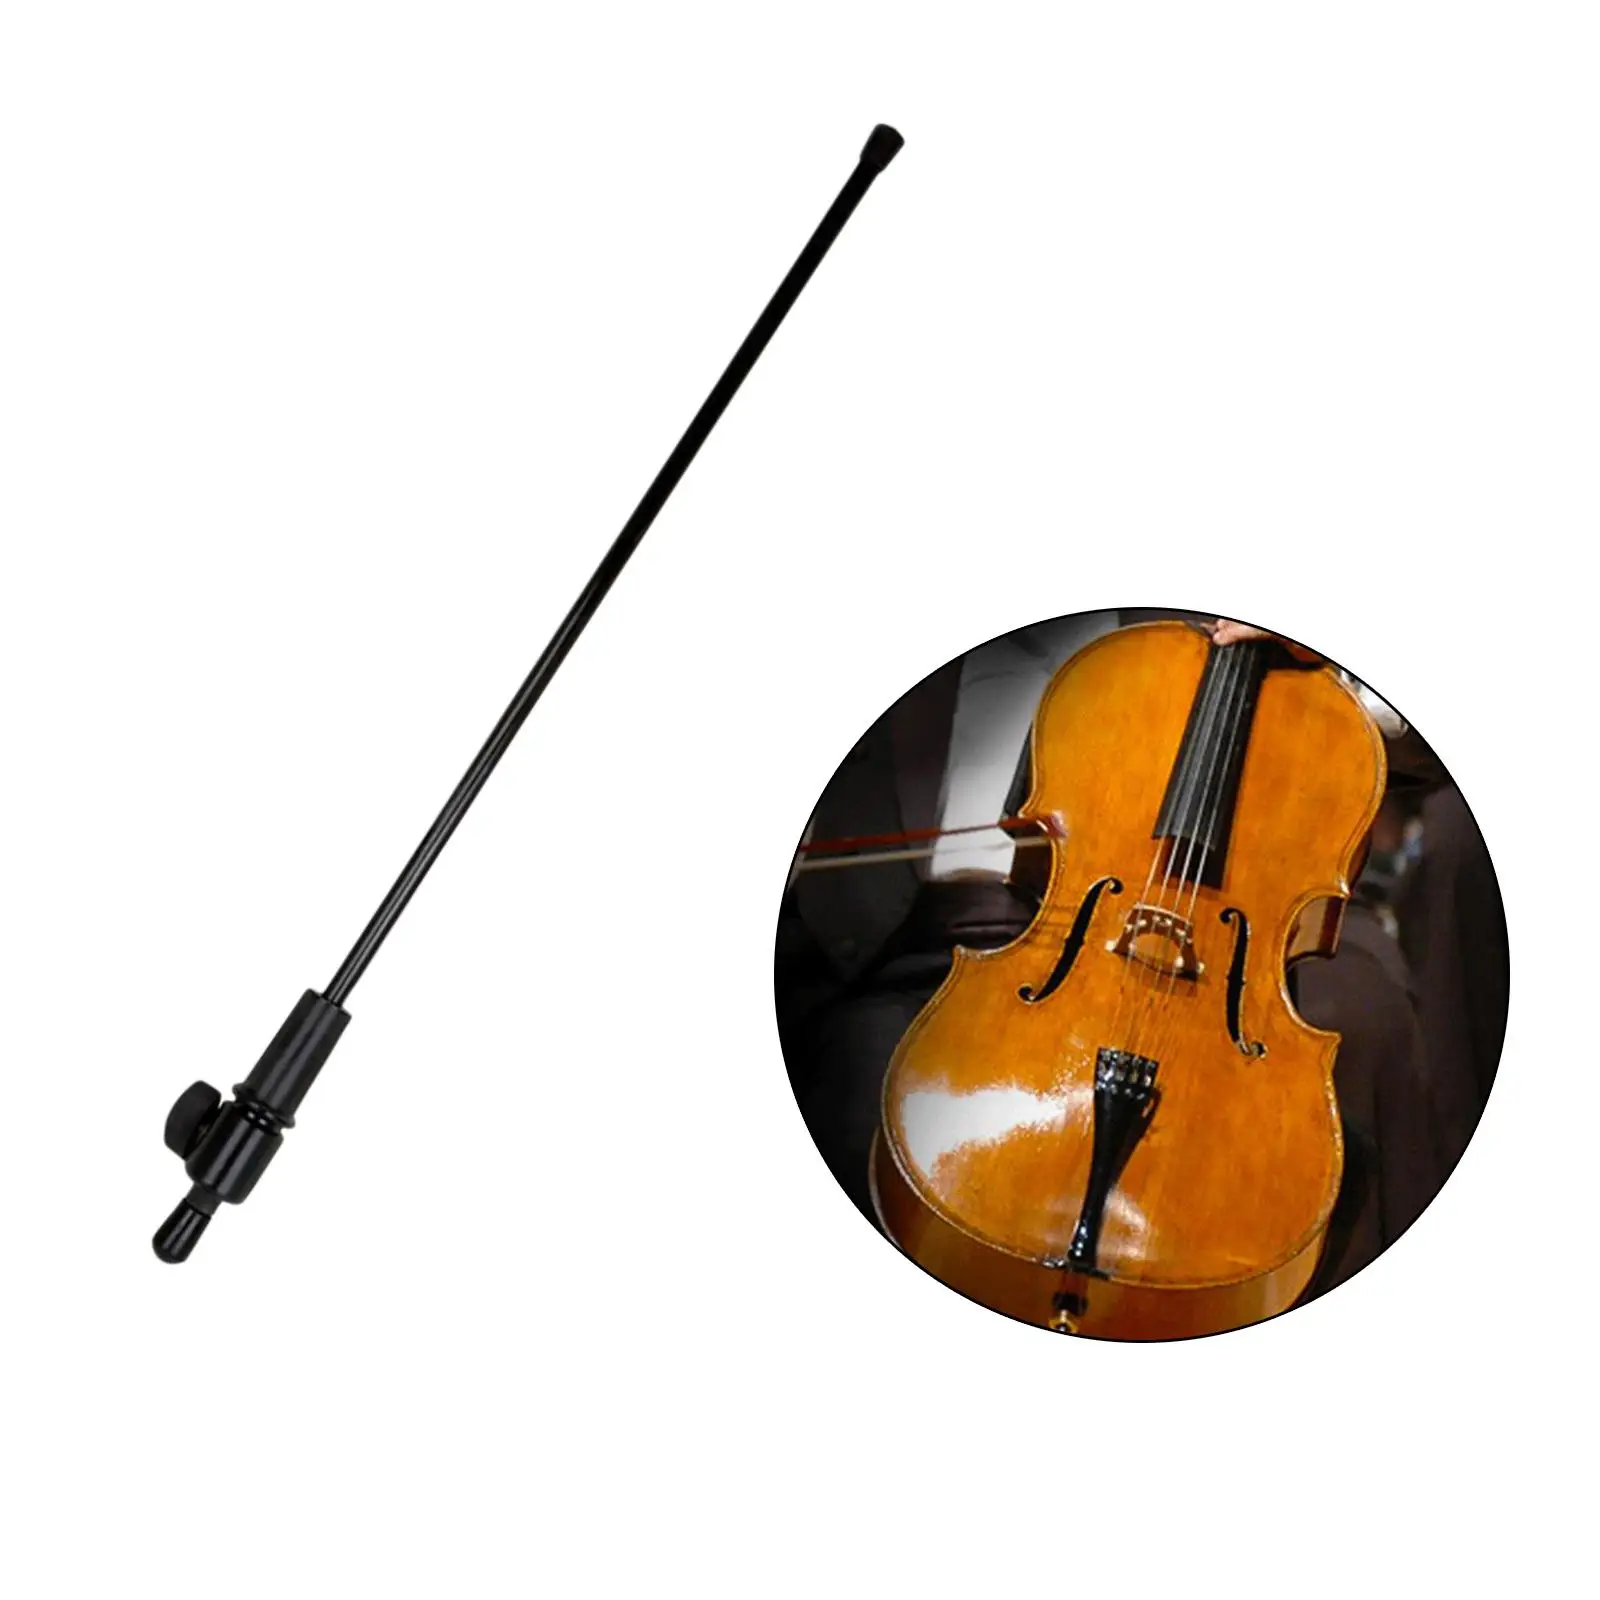 Professional Cello Endpin Replace Parts Accessory Musical Instrument for Teens Kids Beginners Adults Musicians